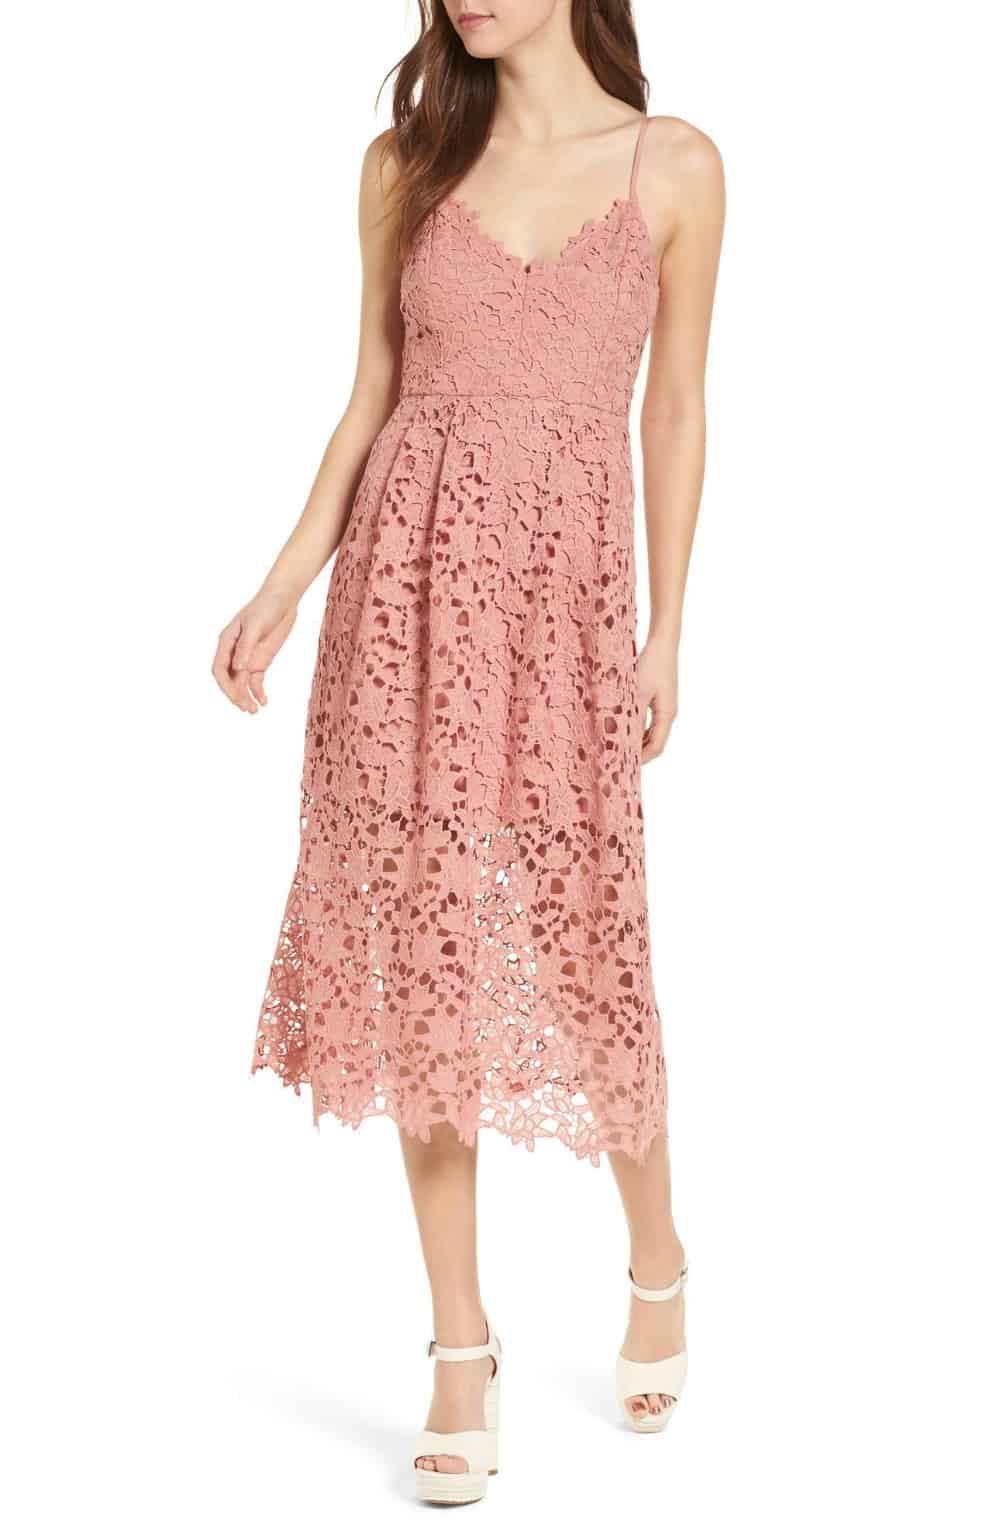  Dusty  Pink Lace Midi Dress  for a Wedding  Guest  Dress  for 